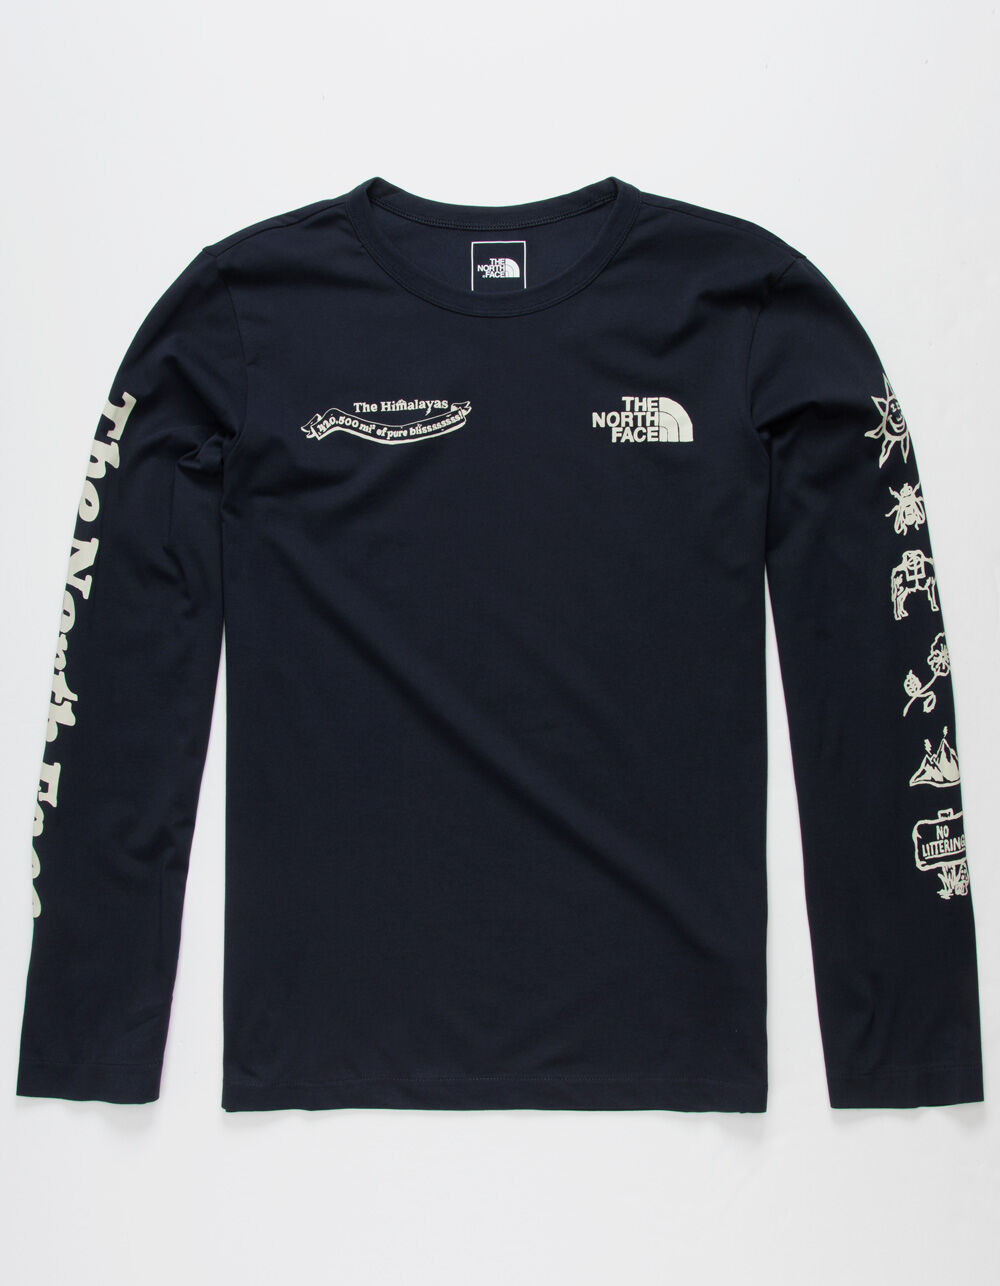 THE NORTH FACE Himalayan Bottle Source T-Shirt - NAVY | Tillys